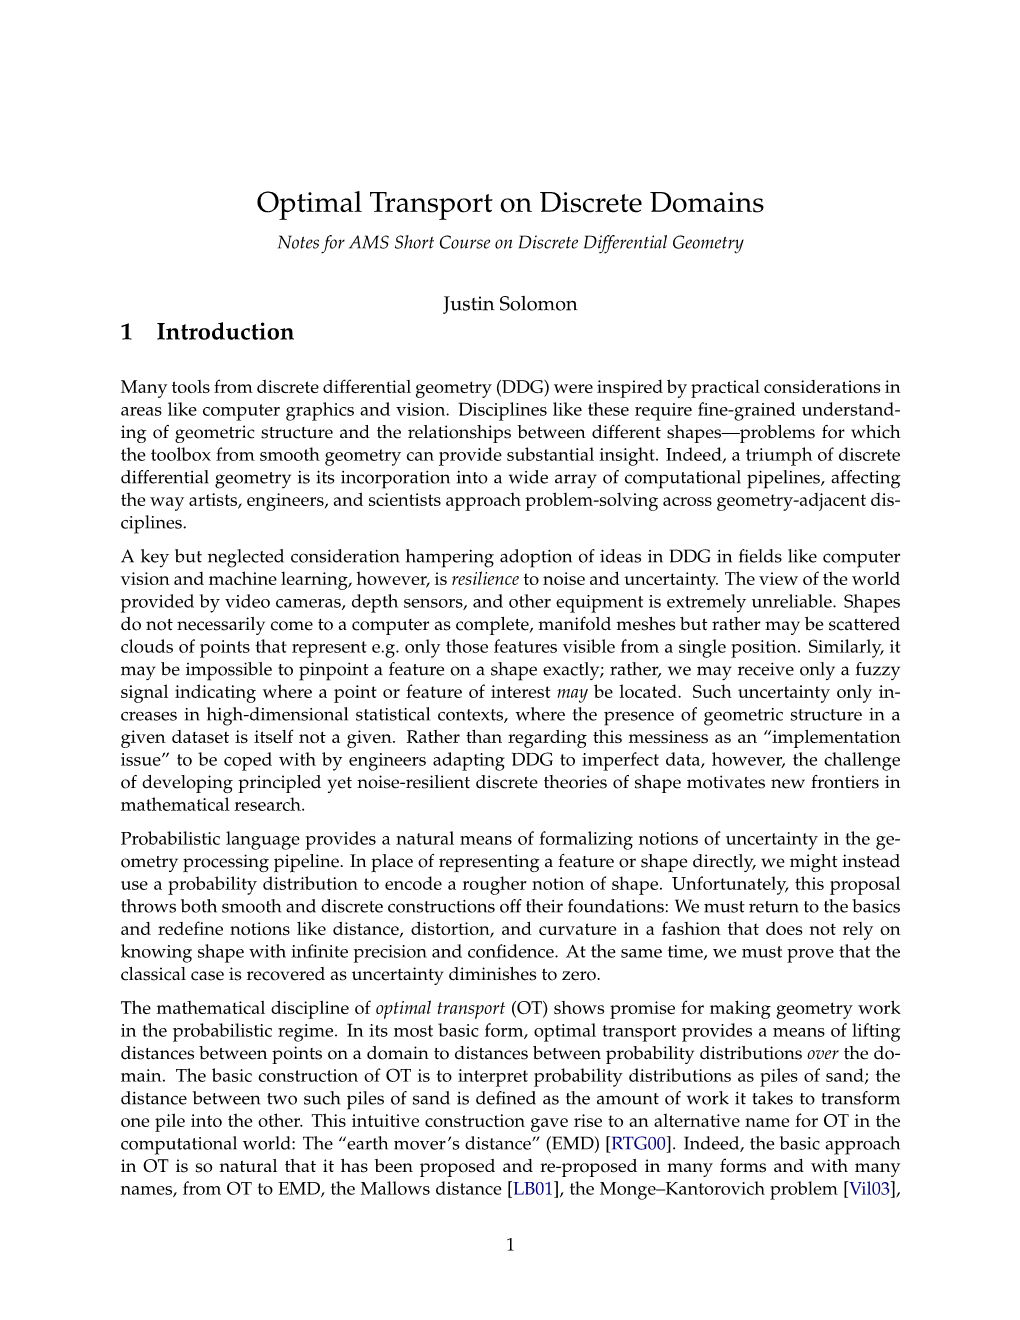 Optimal Transport on Discrete Domains Notes for AMS Short Course on Discrete Differential Geometry